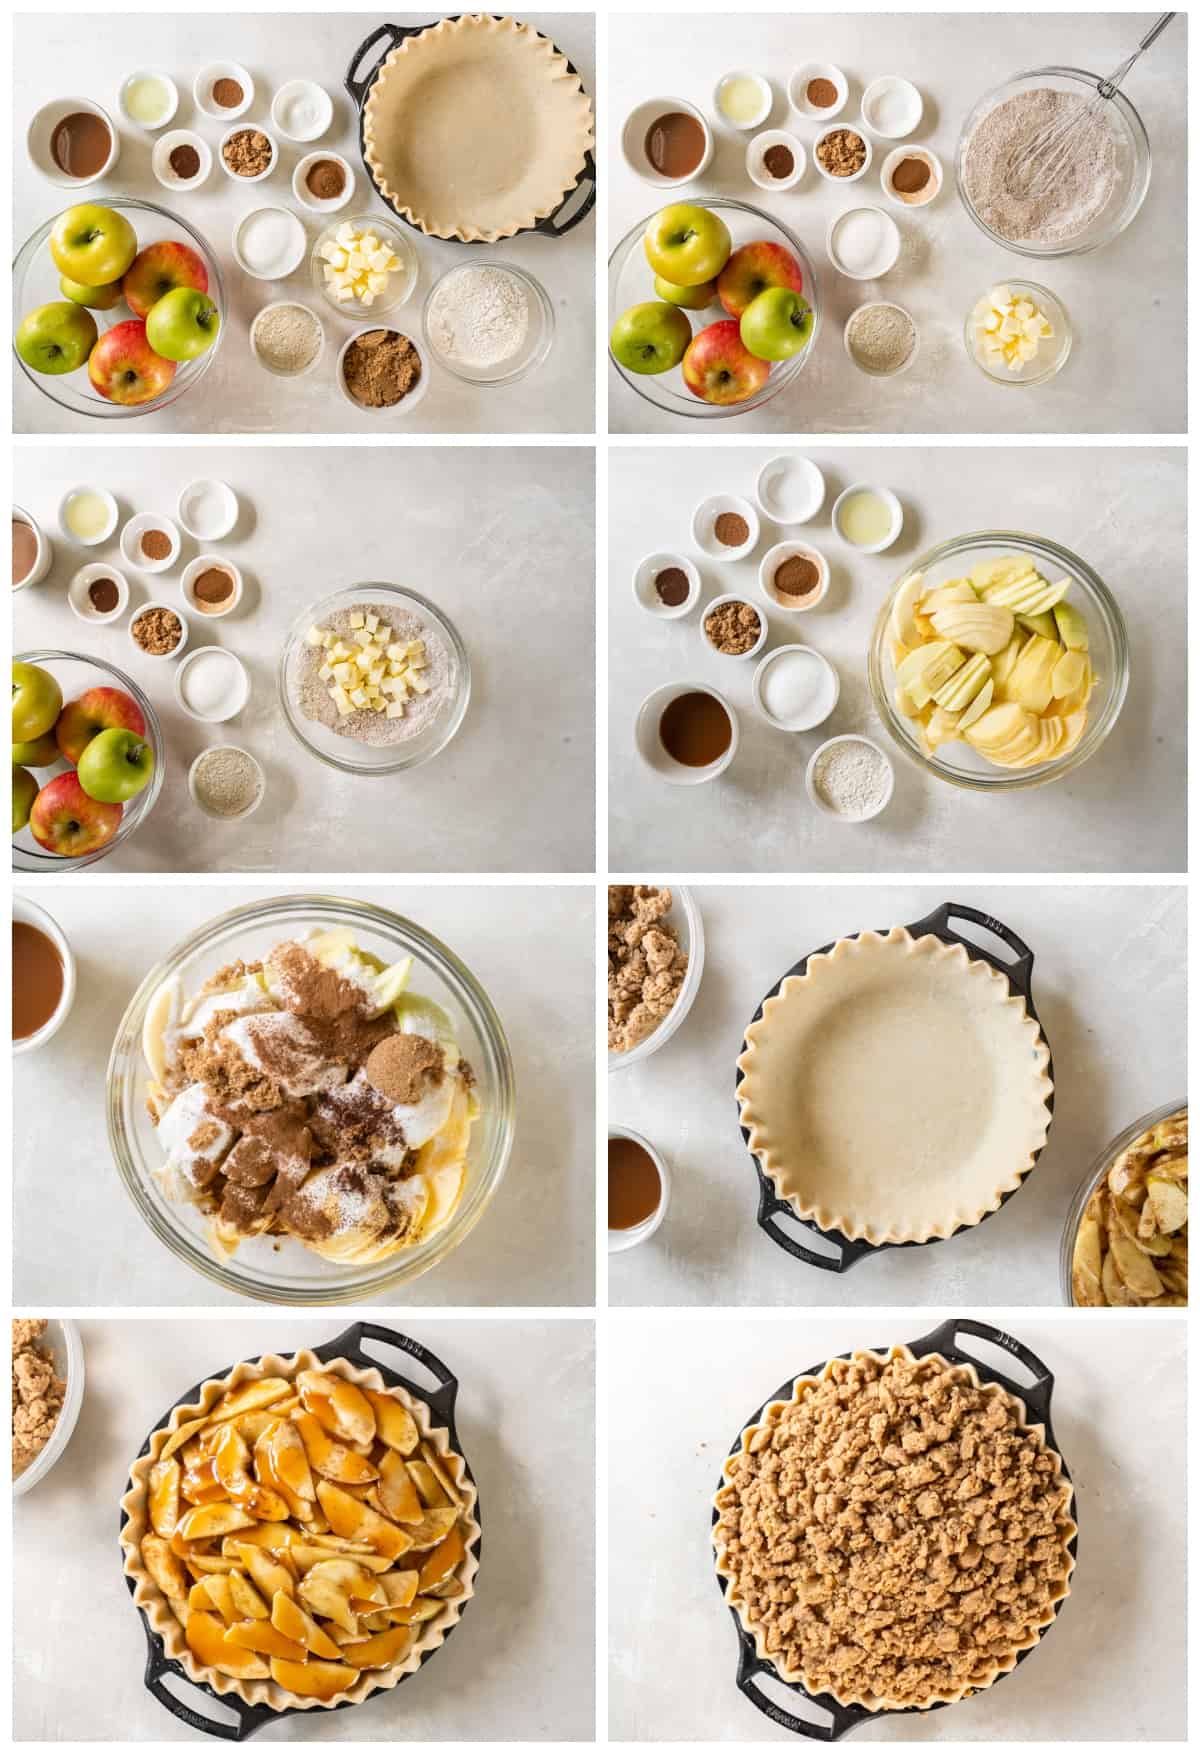 how to make caramel apple pie step by step photo instructions